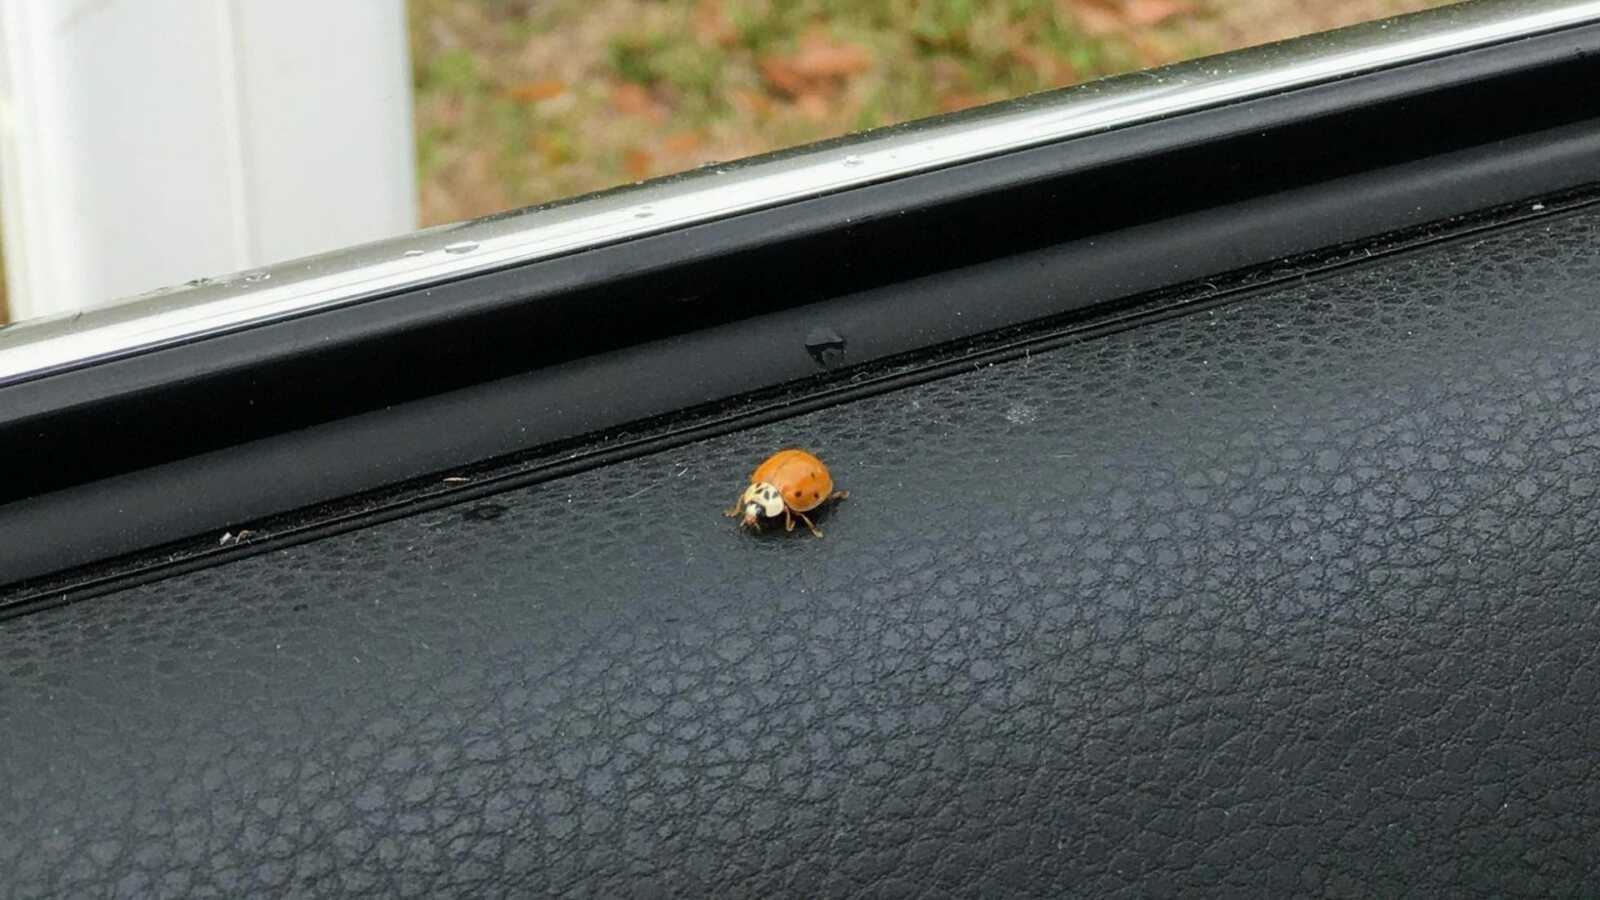 Ladybug crawls into the open window of a car as the driver checks the mail